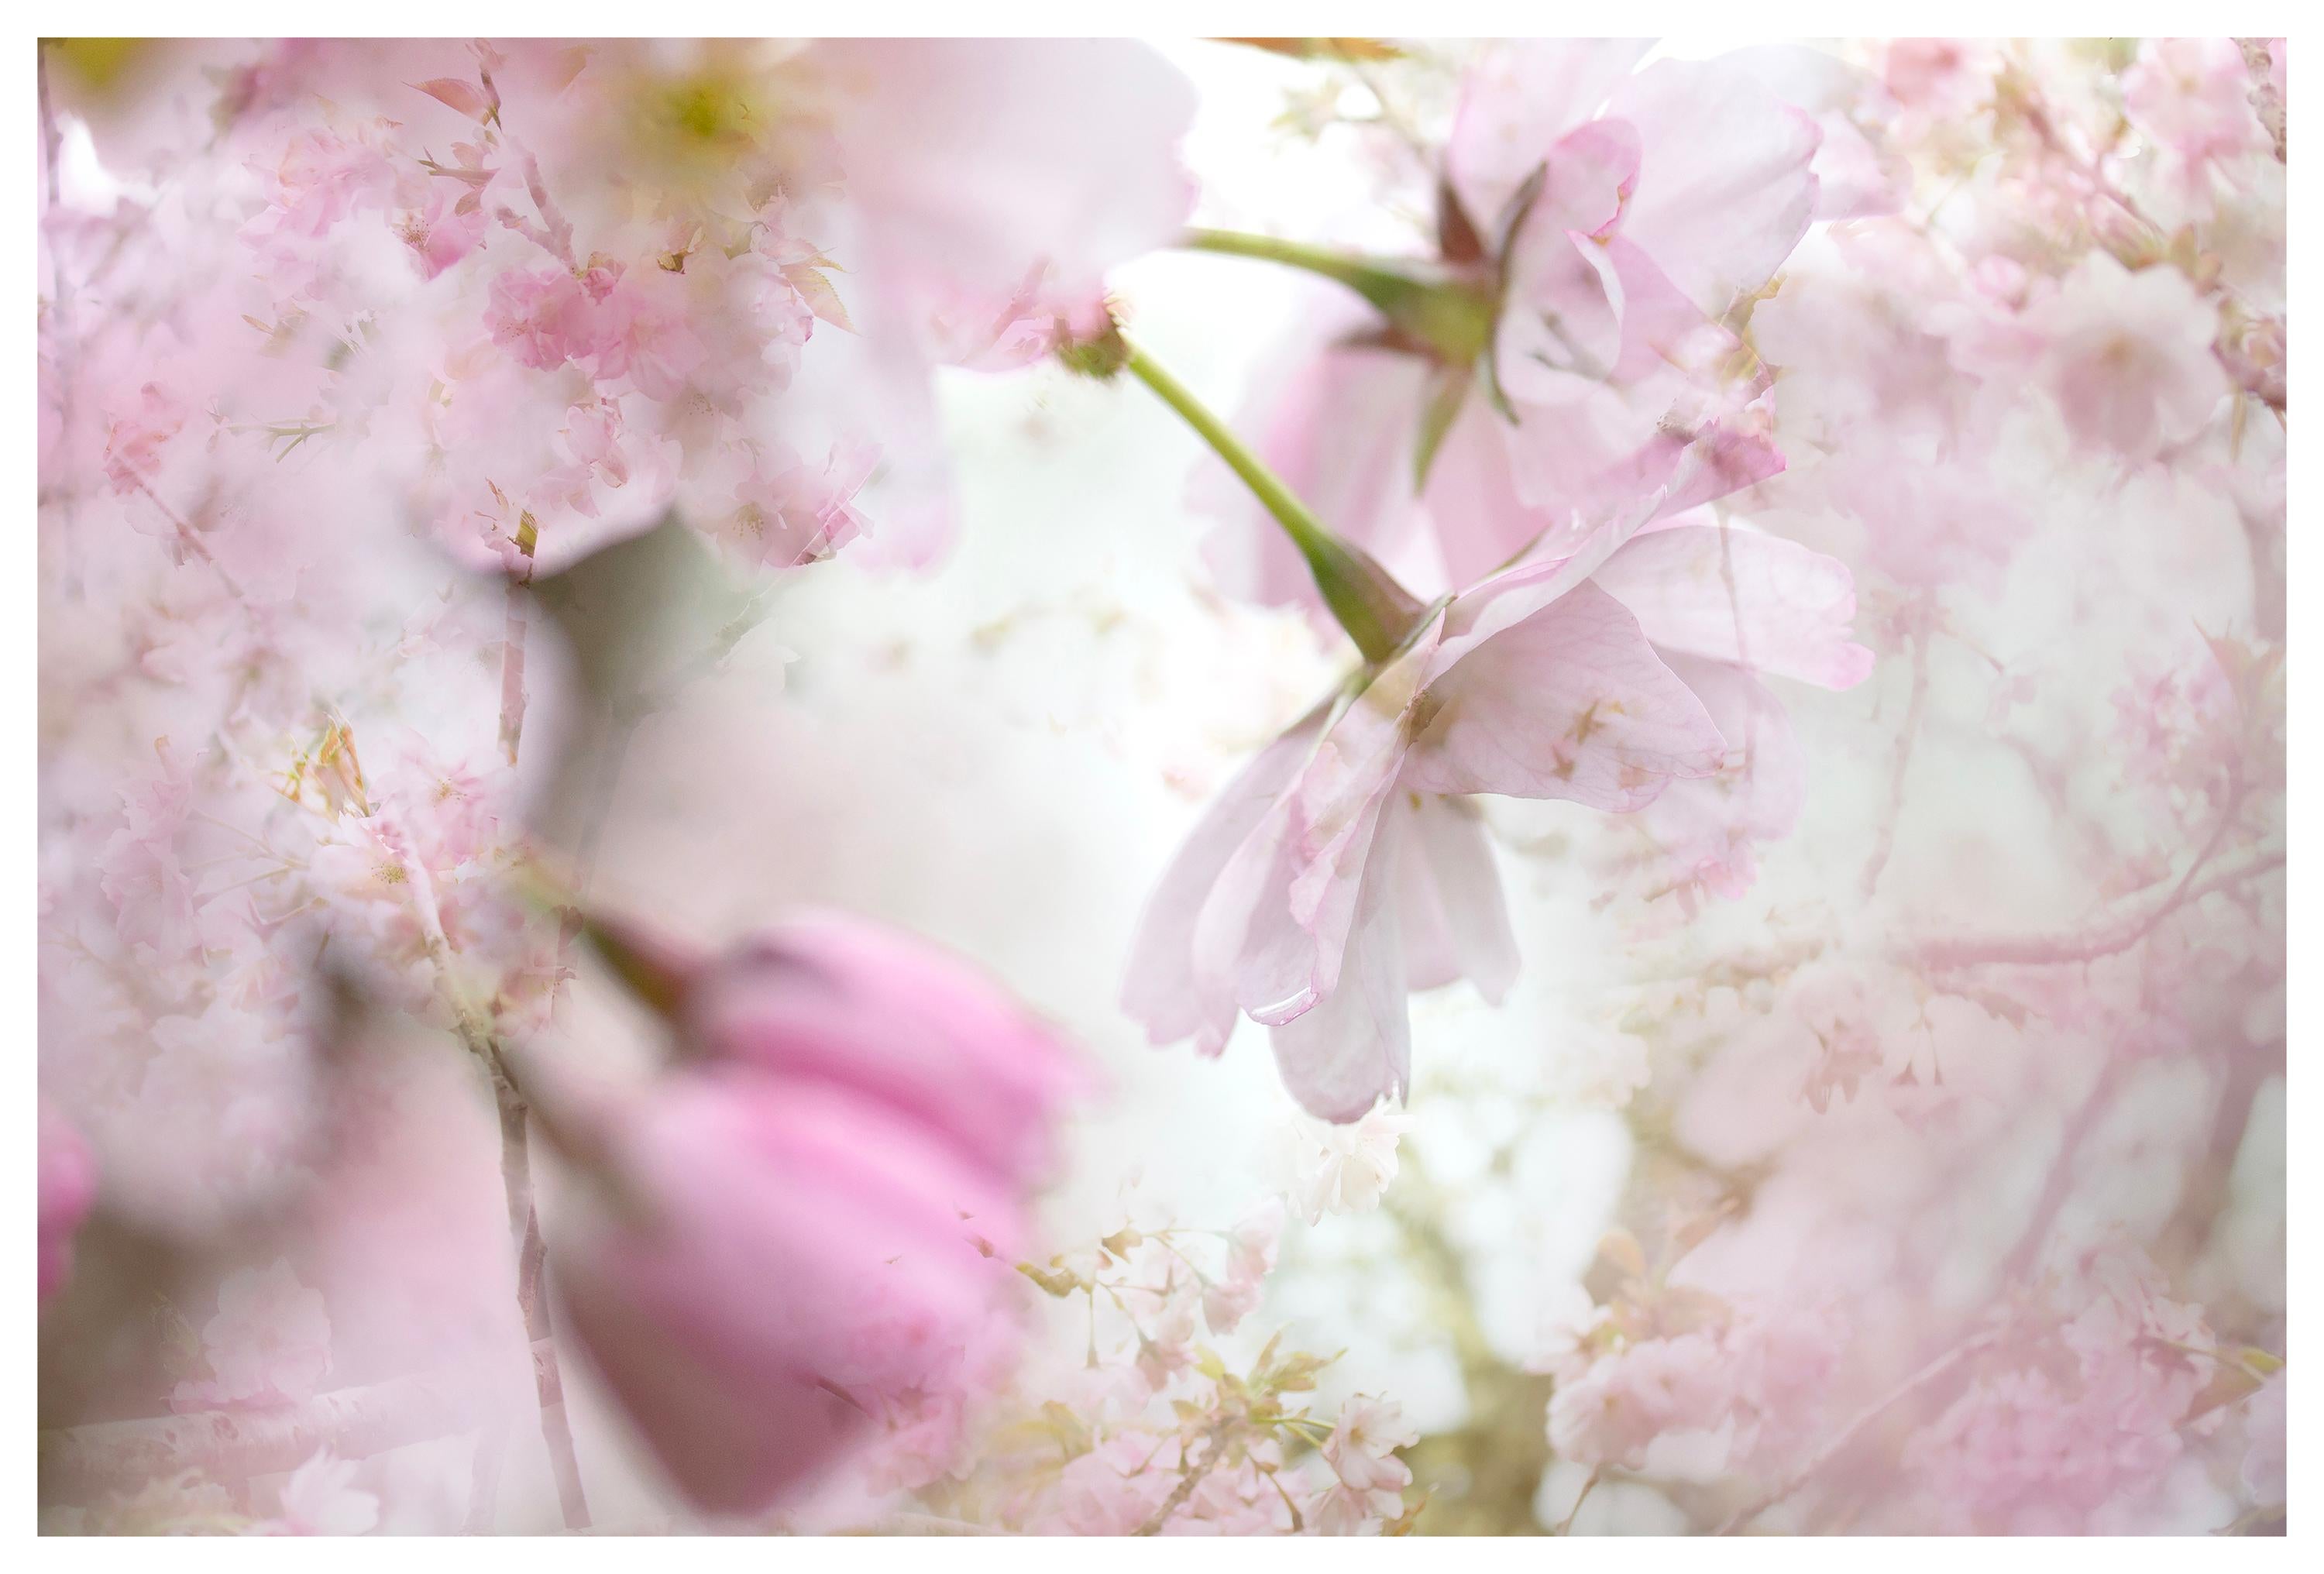 Sophia Milligan Color Photograph - 'Spring couplet' Large Scale Photograph Cherry blossom Sakura flowers white pink